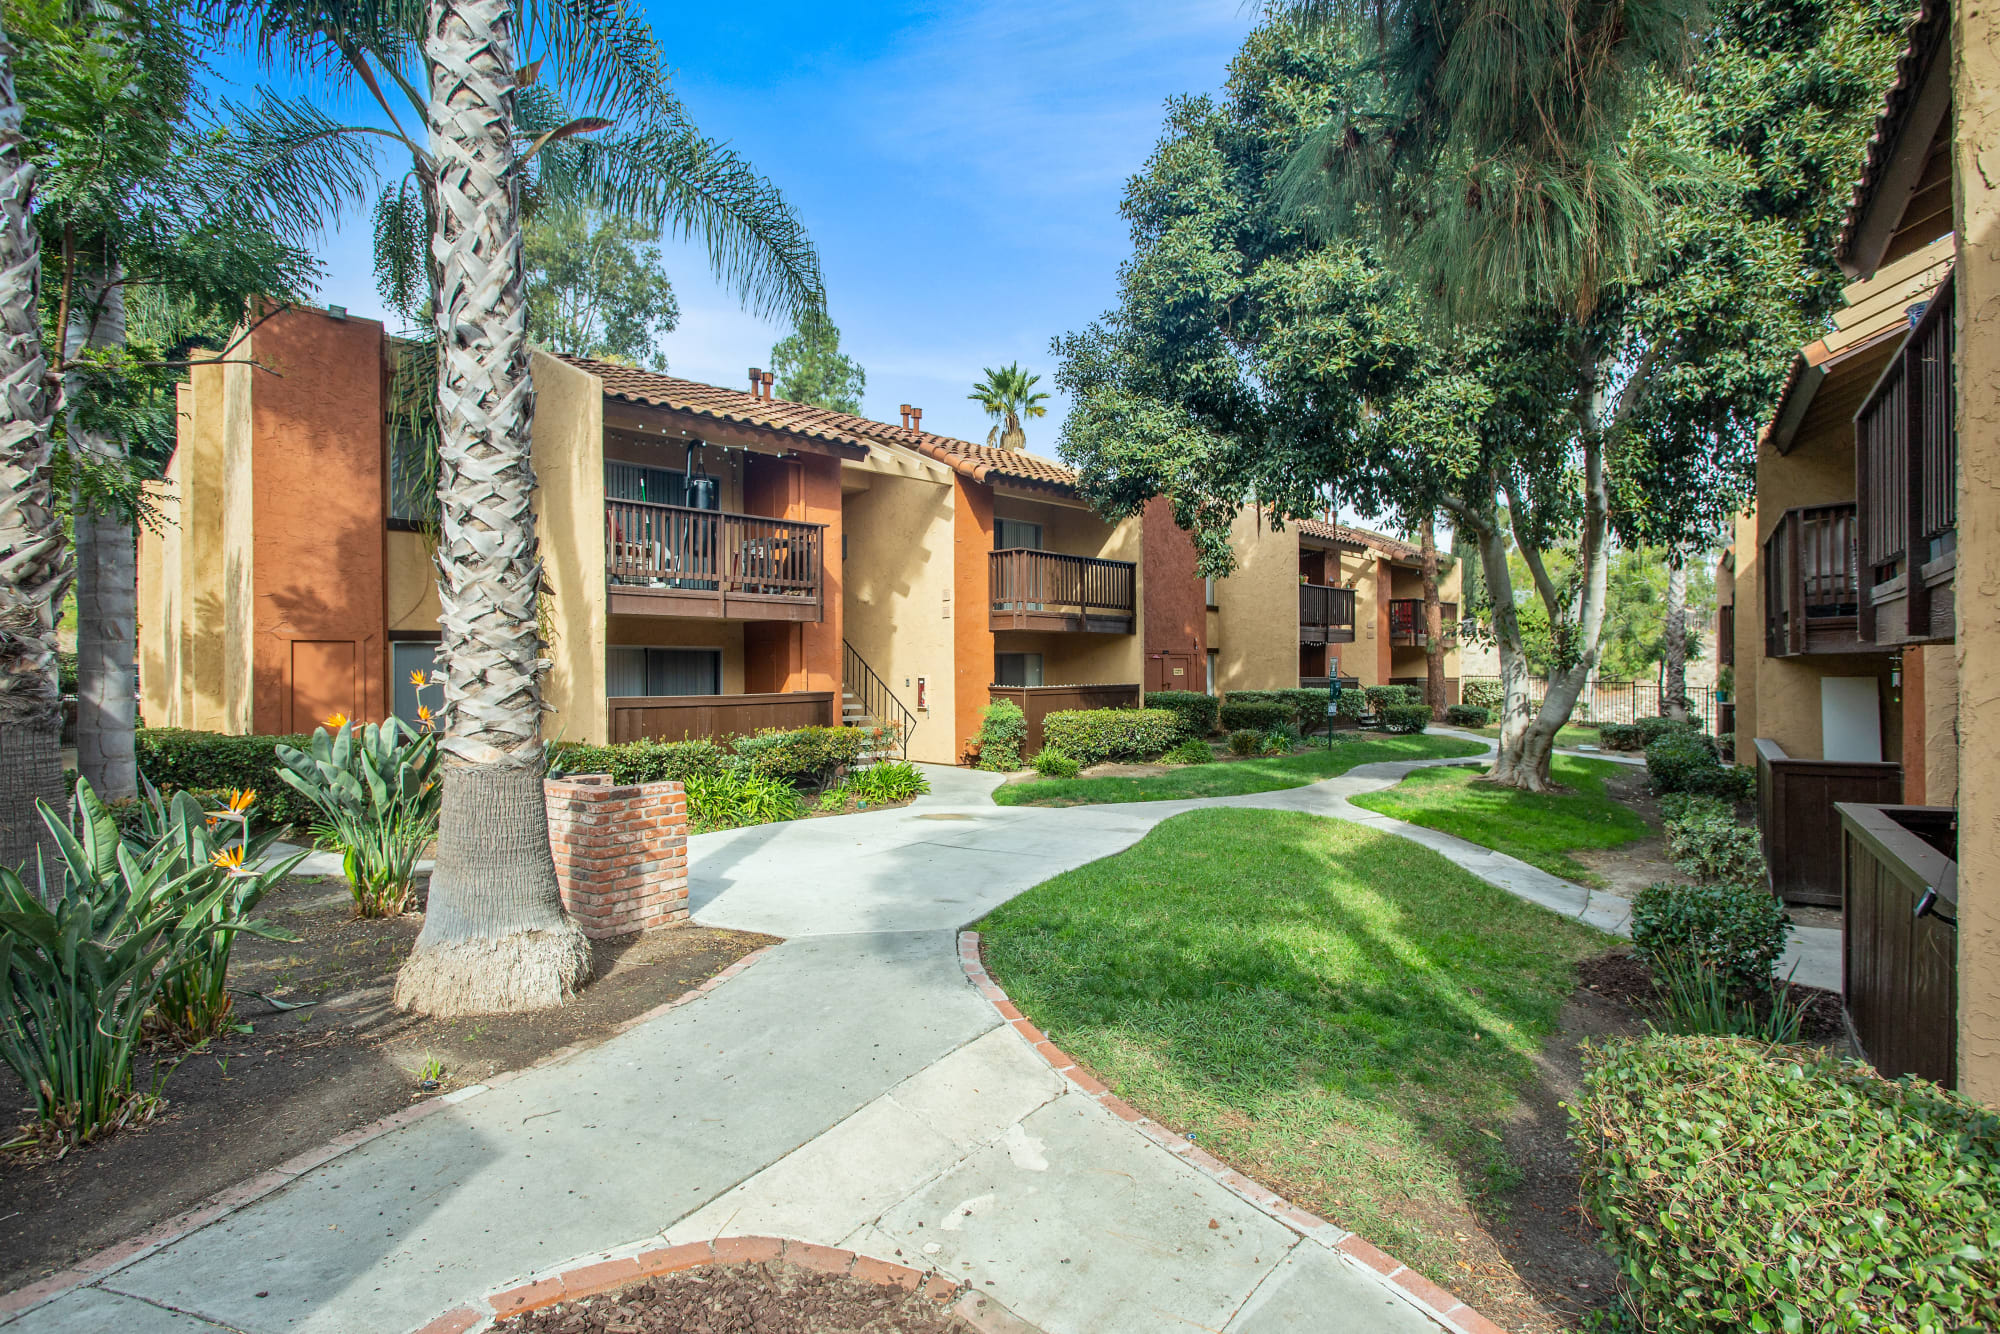 Walkway and community courtyard area at Shadow Ridge Apartments in Oceanside, California